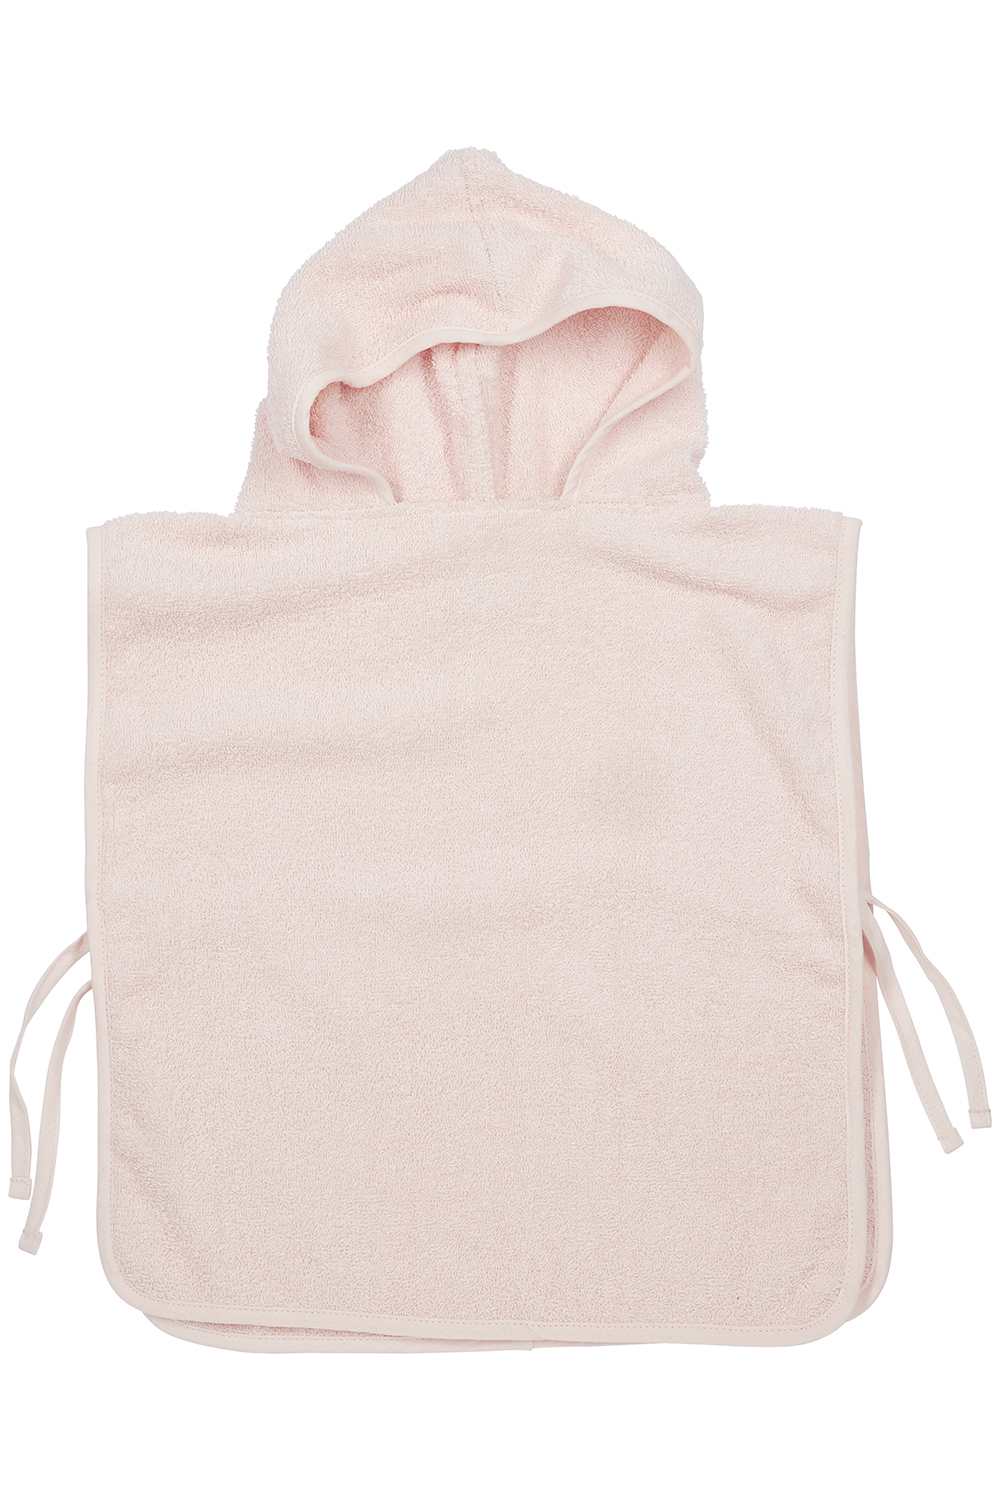 Badeponcho frottee Uni - soft pink - 1-3 Jahre